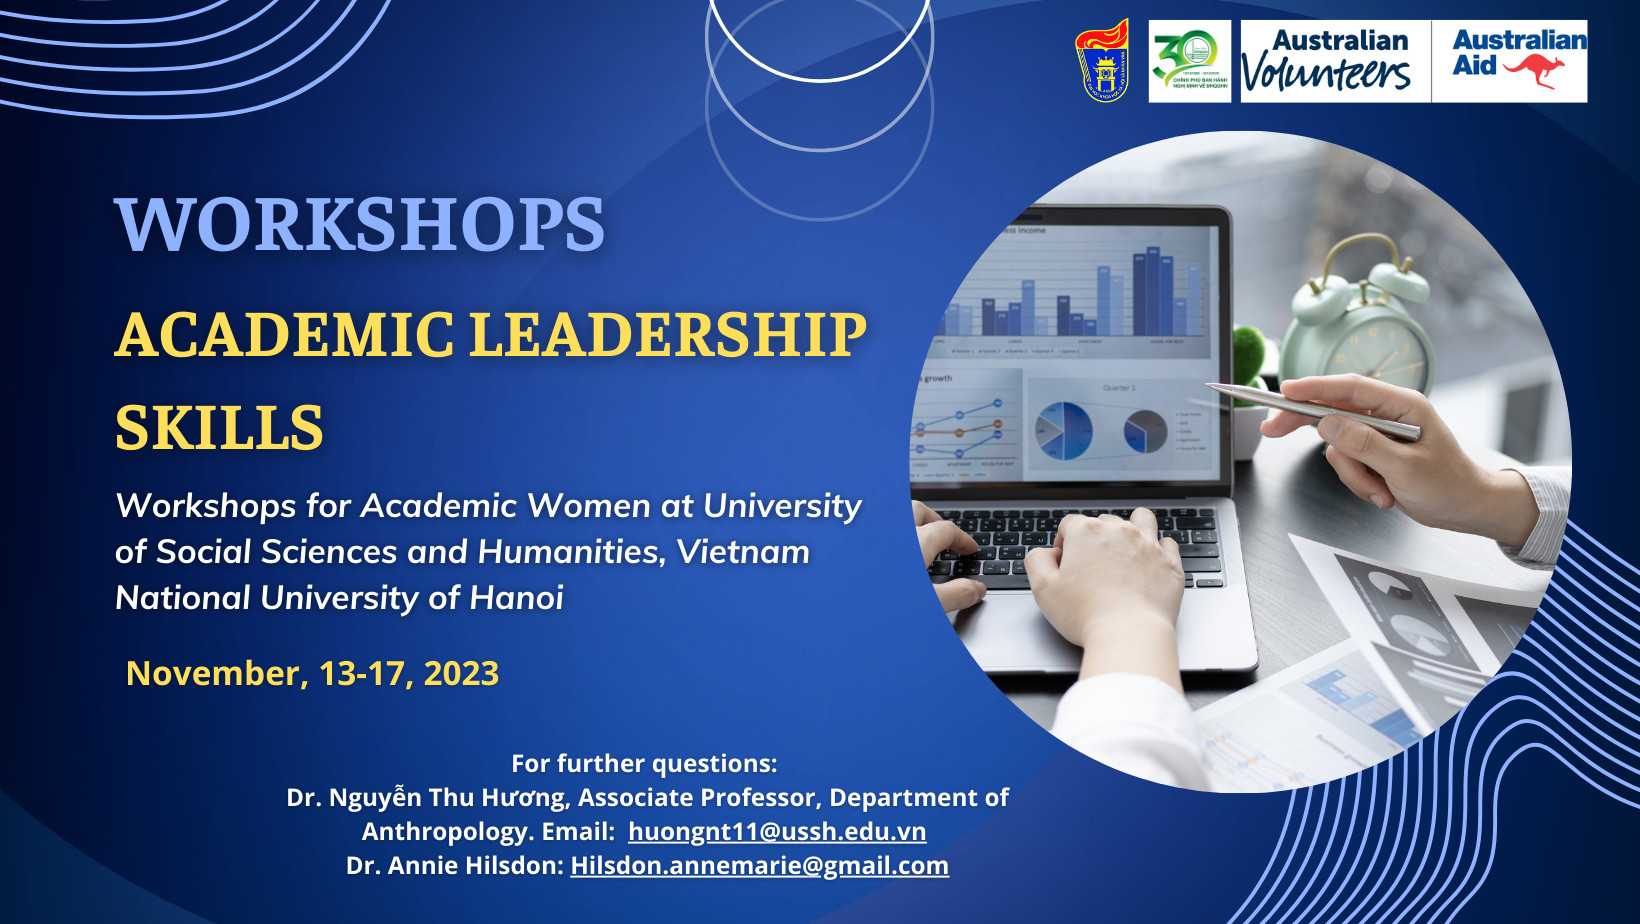 Workshops for Academic Women at University of Social Sciences and Humanities, Vietnam National University of Hanoi